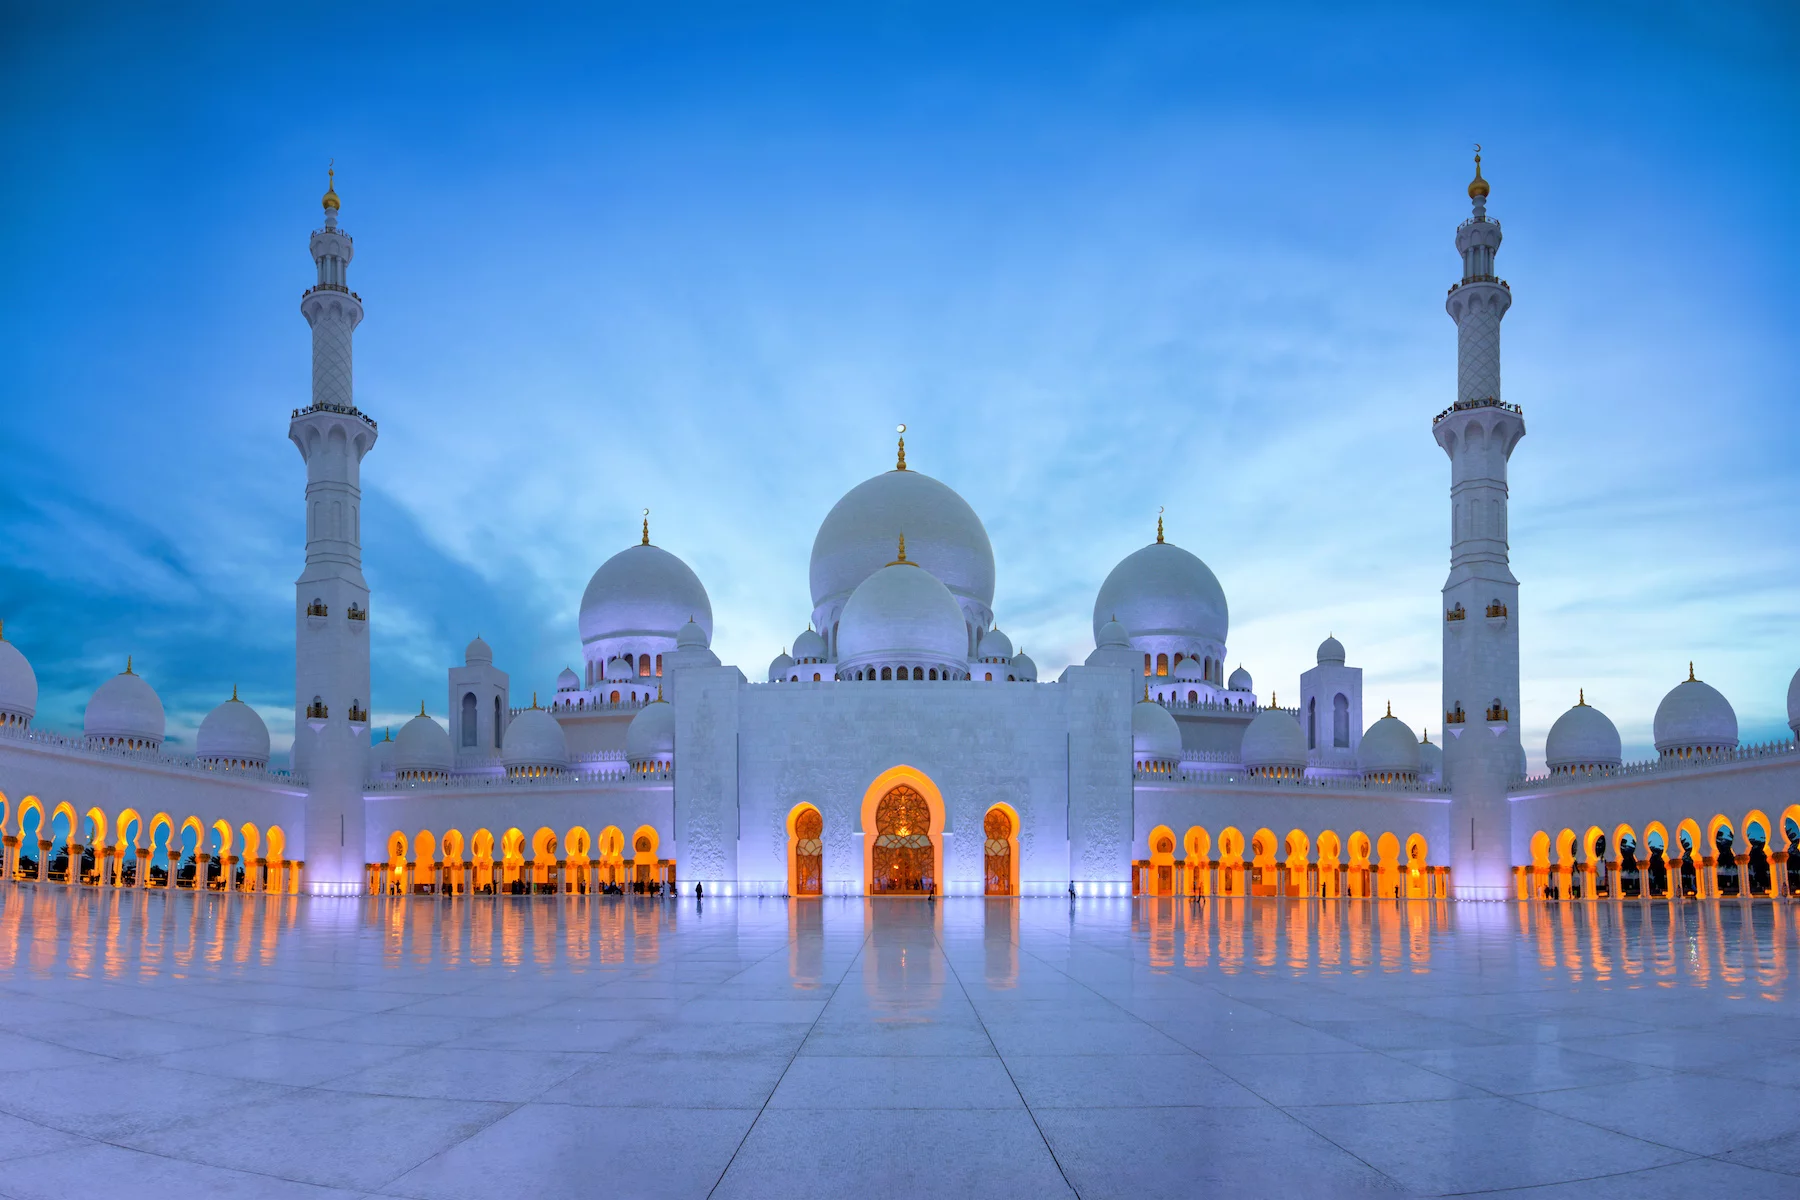 The Grand Mosque in Abu Dhabi at dusk